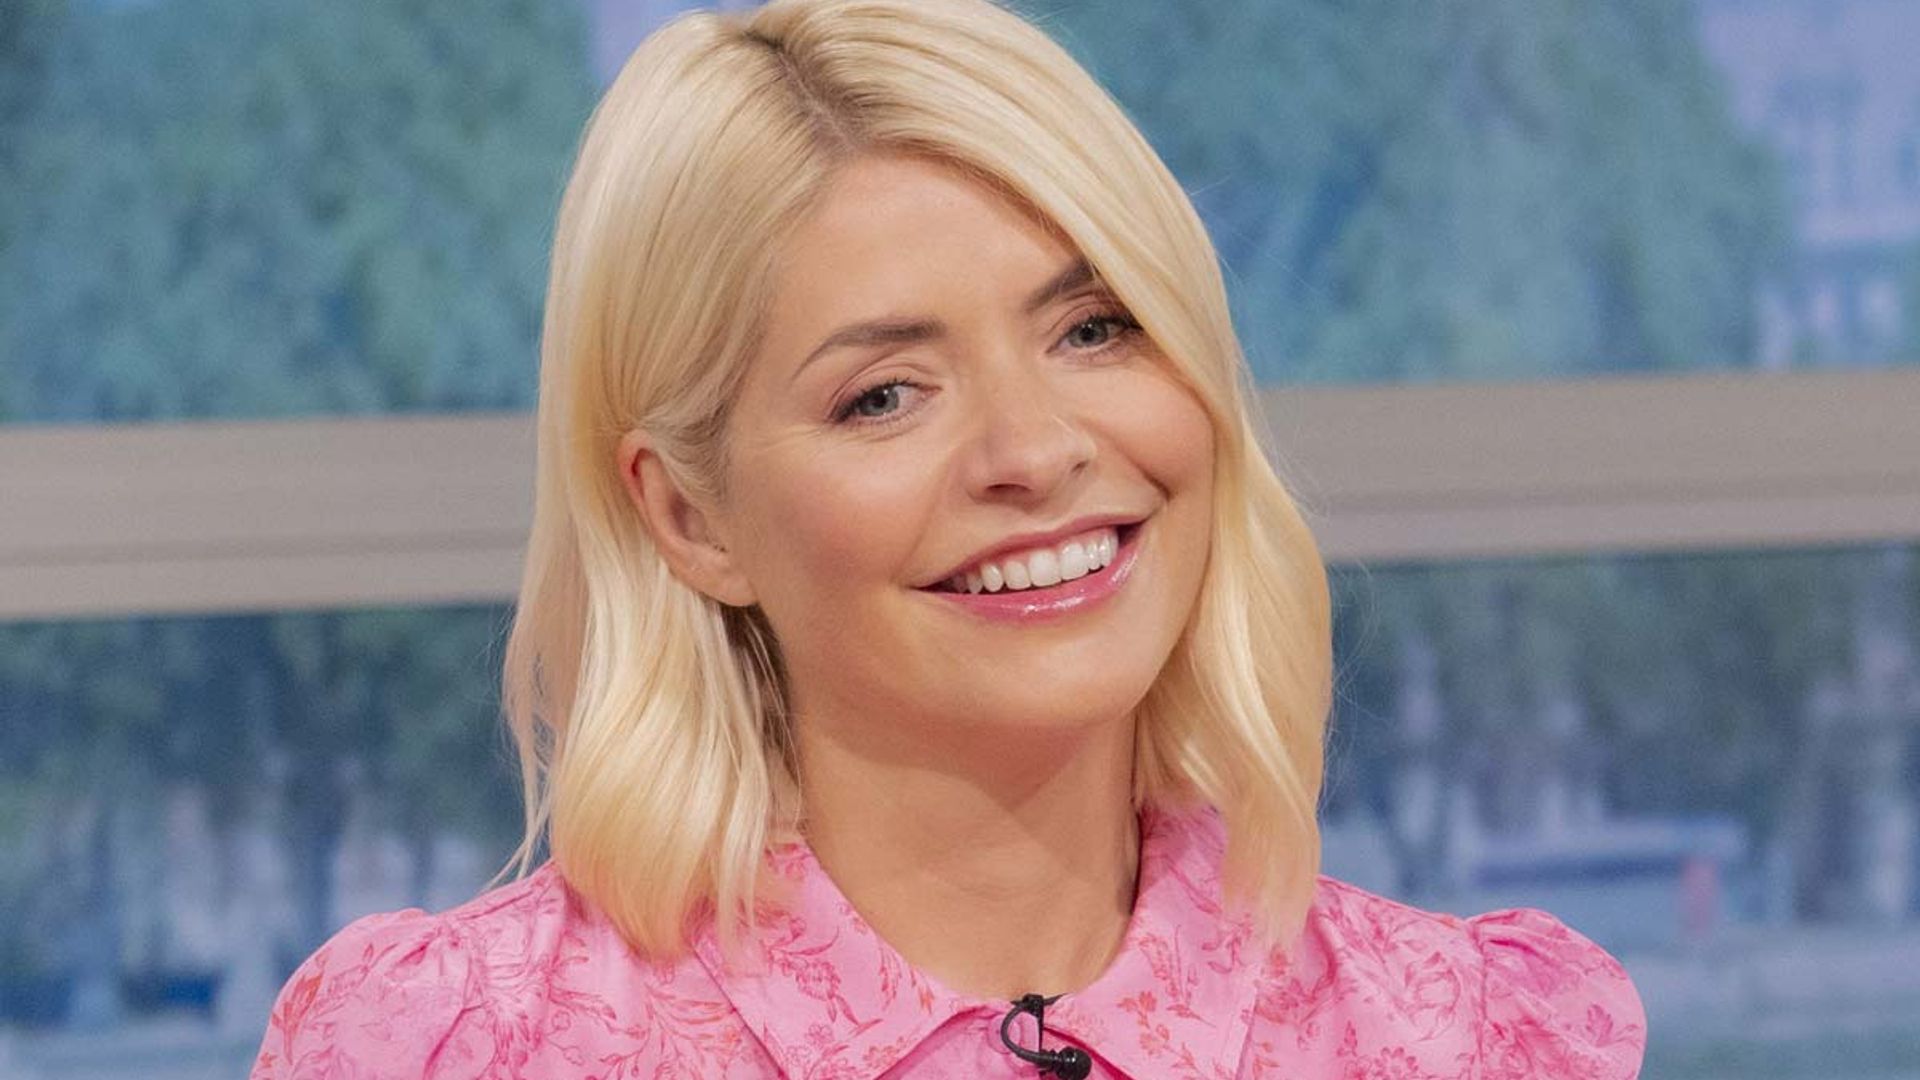 Holly Willoughby's ultra-flattering dress is the perfect summer frock